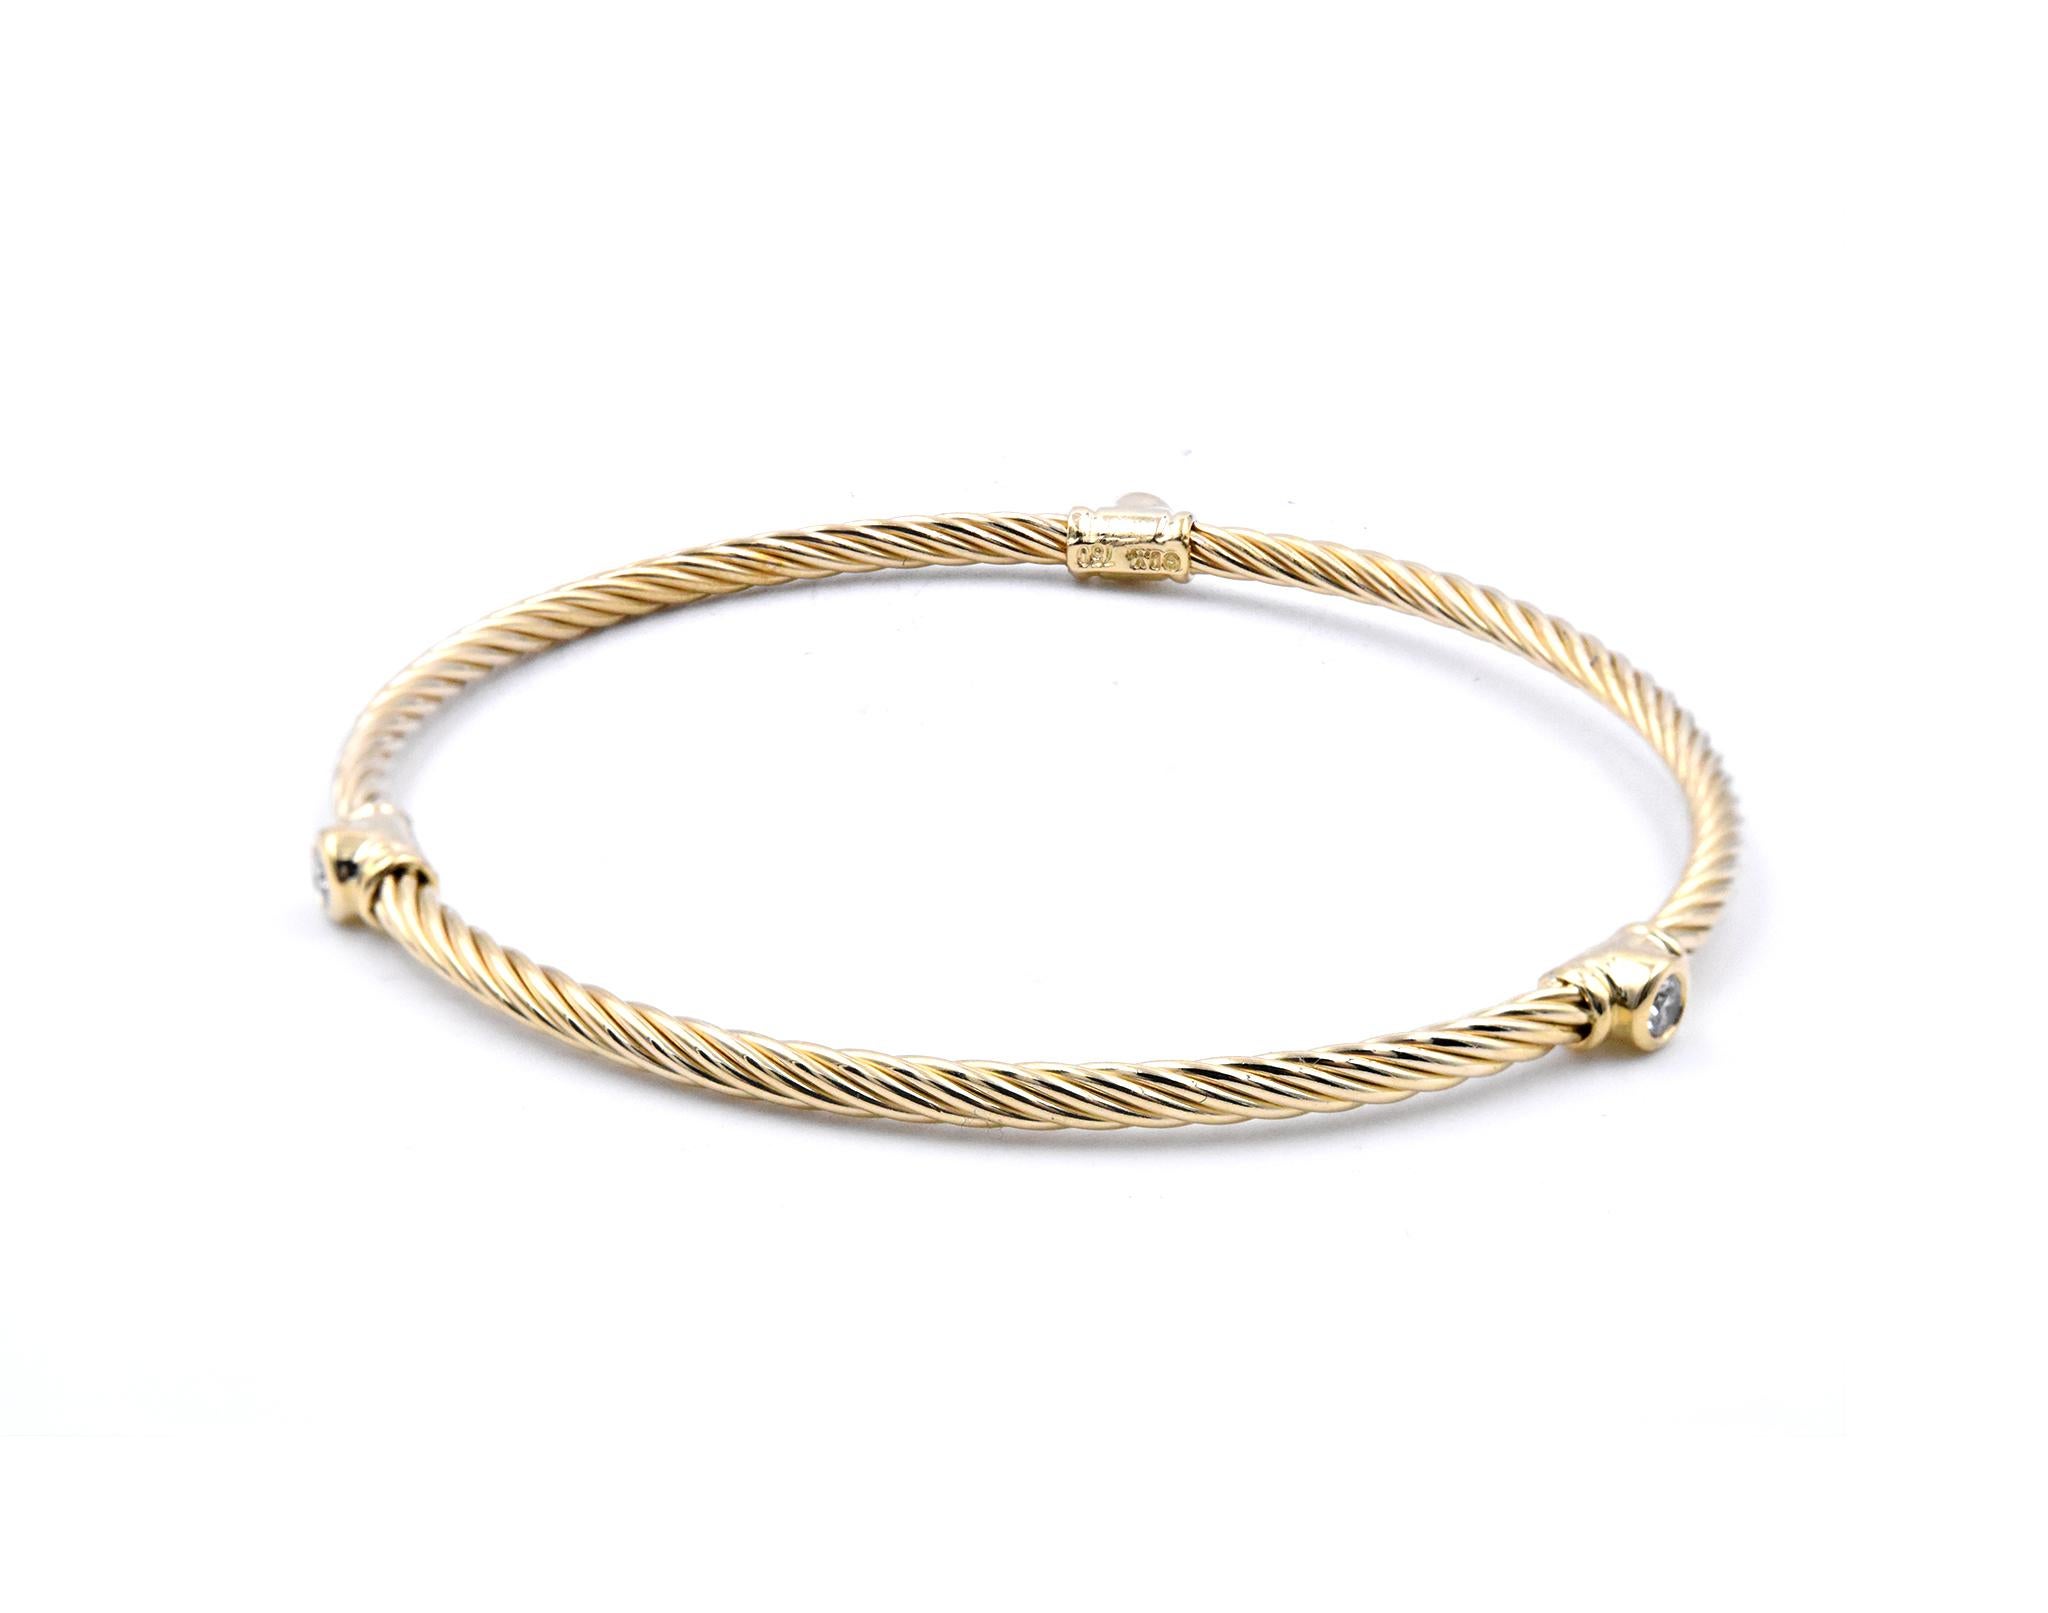 Designer: David Yurman
Material: 18k yellow gold
Diamonds: 3 round brilliant cuts = 0.30cttw
Color: G
Clarity: VS2
Dimensions: the bracelet measures 7.5 inches in length and 2.90mm in width
Weight: 10.25 grams
